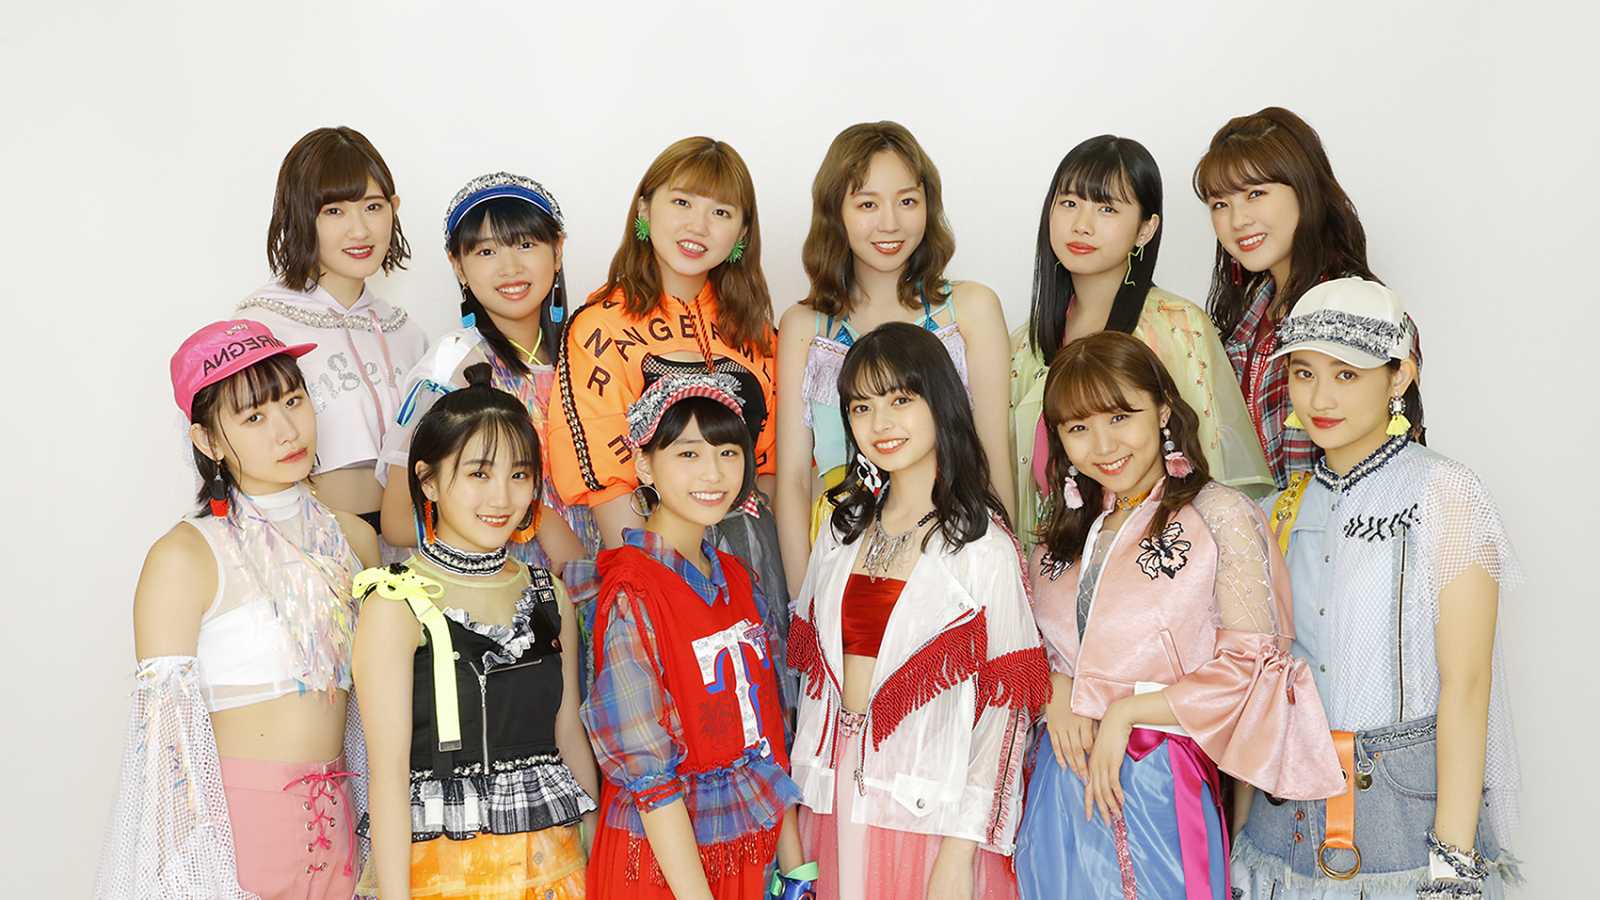 Interview with ANGERME © DC FACTORY. All rights reserved.